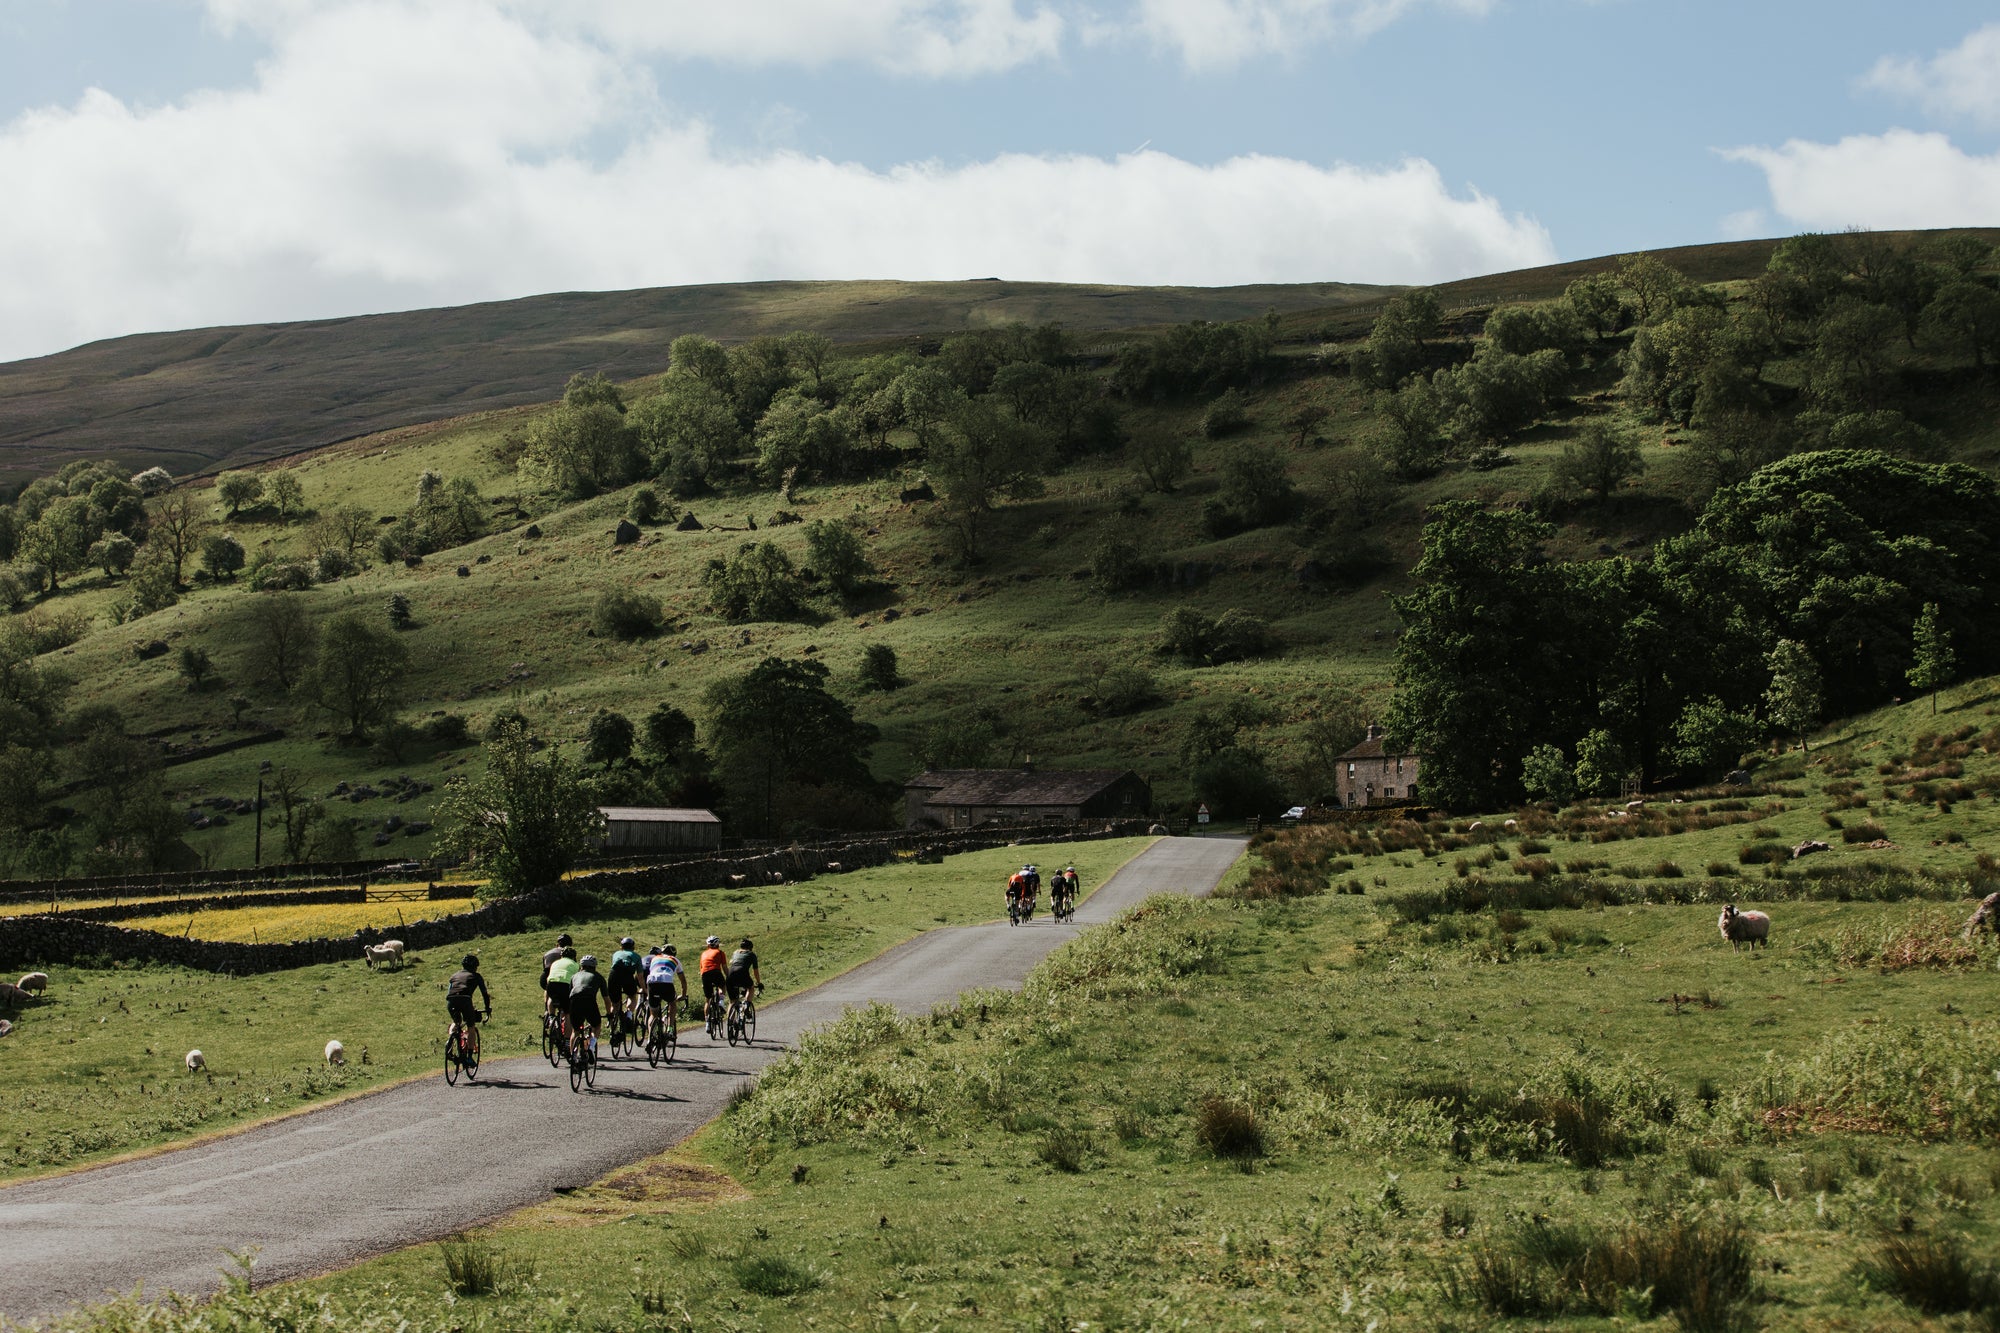 Video // The Dales // UK's Toughest Group Ride